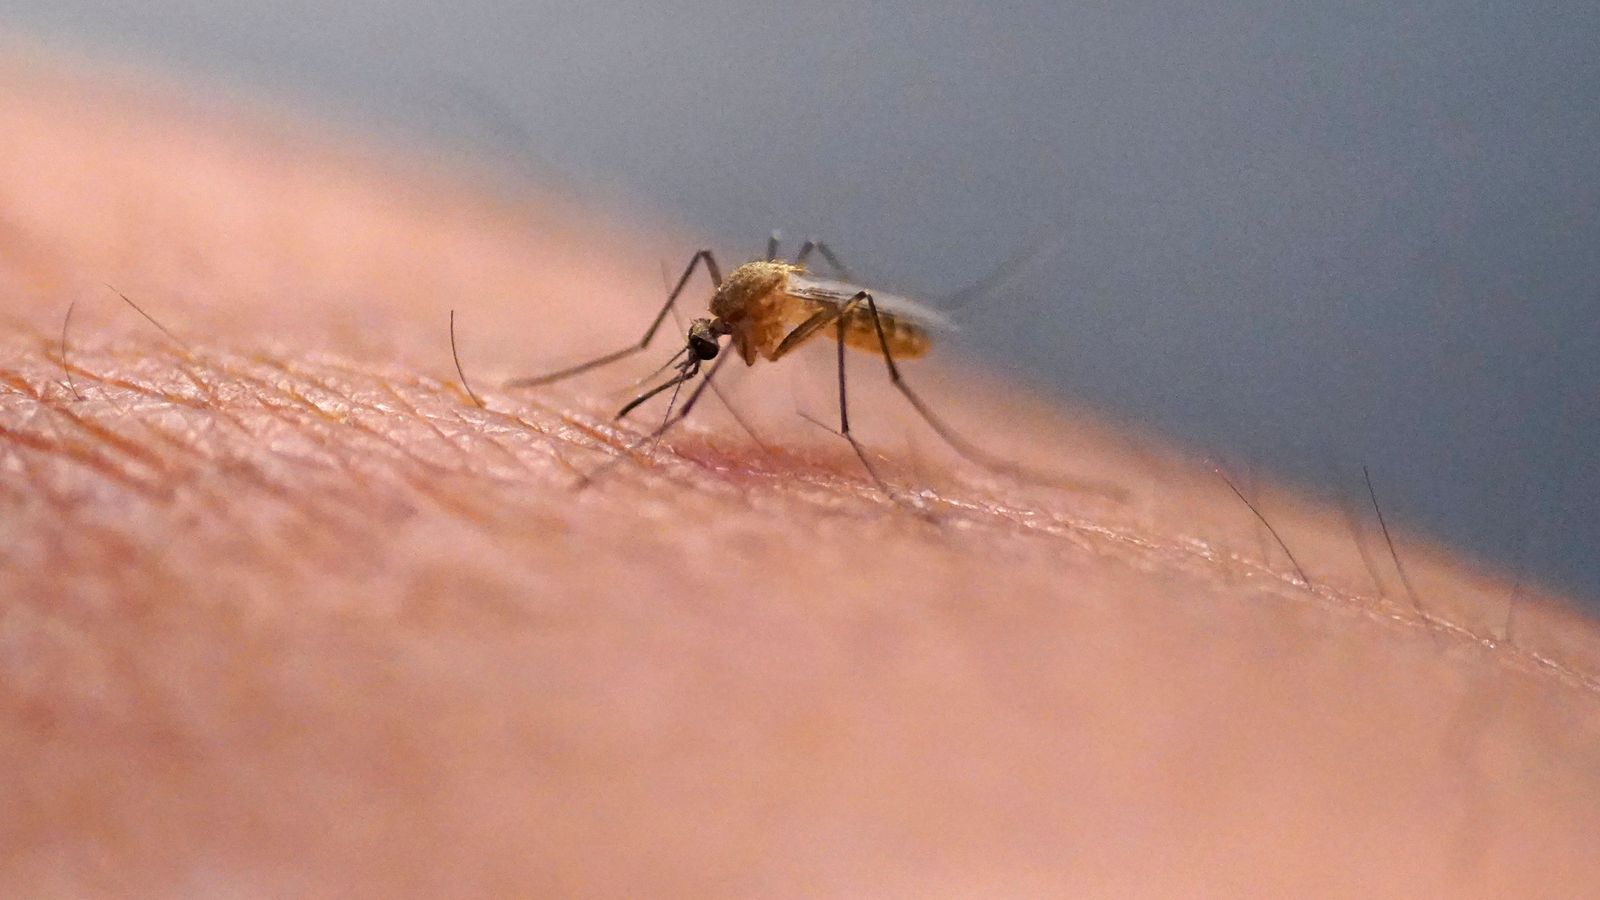 Over half of world’s inhabitants might be vulnerable to mosquito-borne illnesses, consultants warn